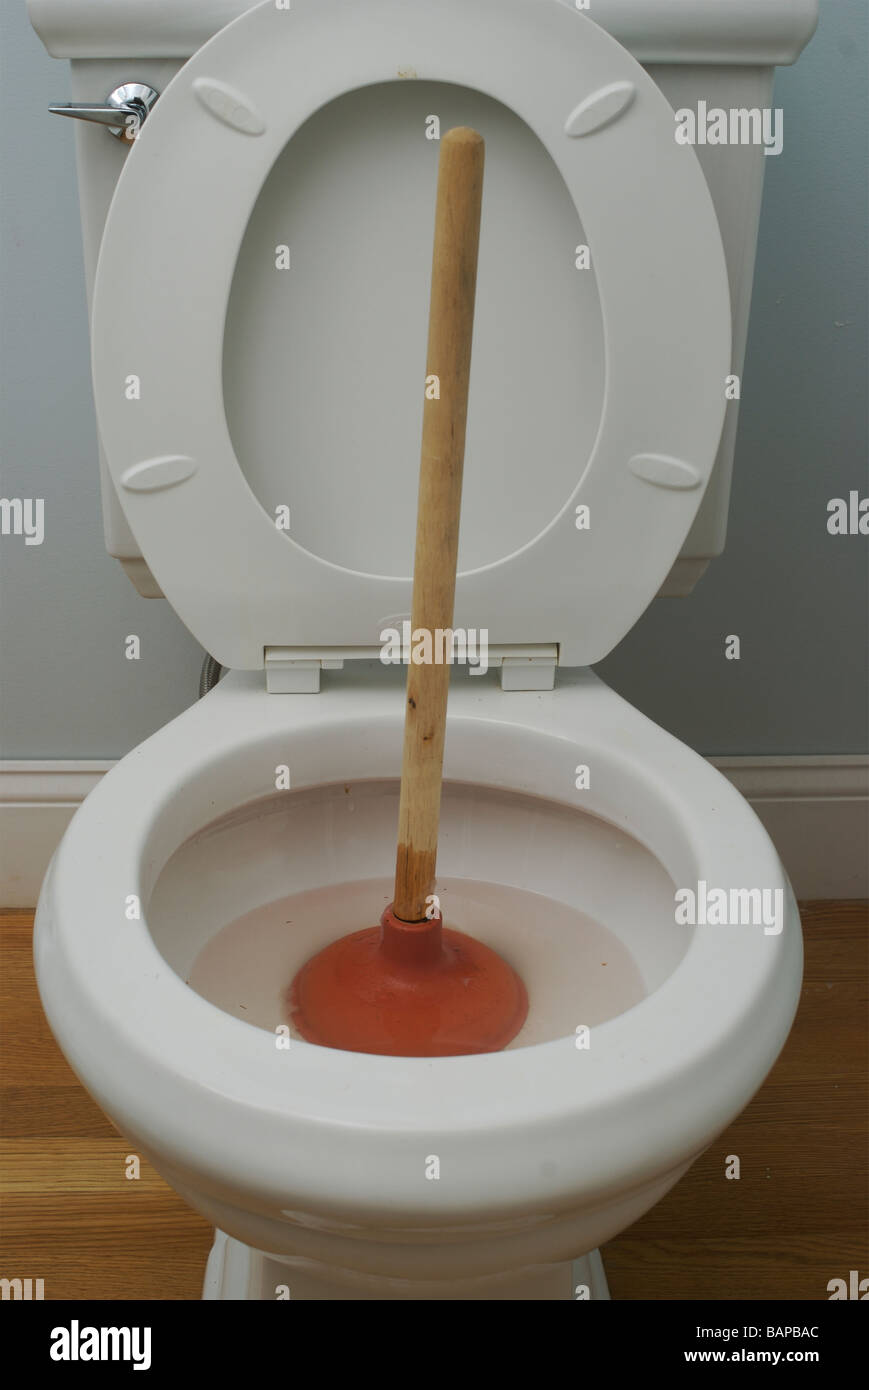 Clogged toilet stock photo. Image of dirt, paper, ceramic - 36719772